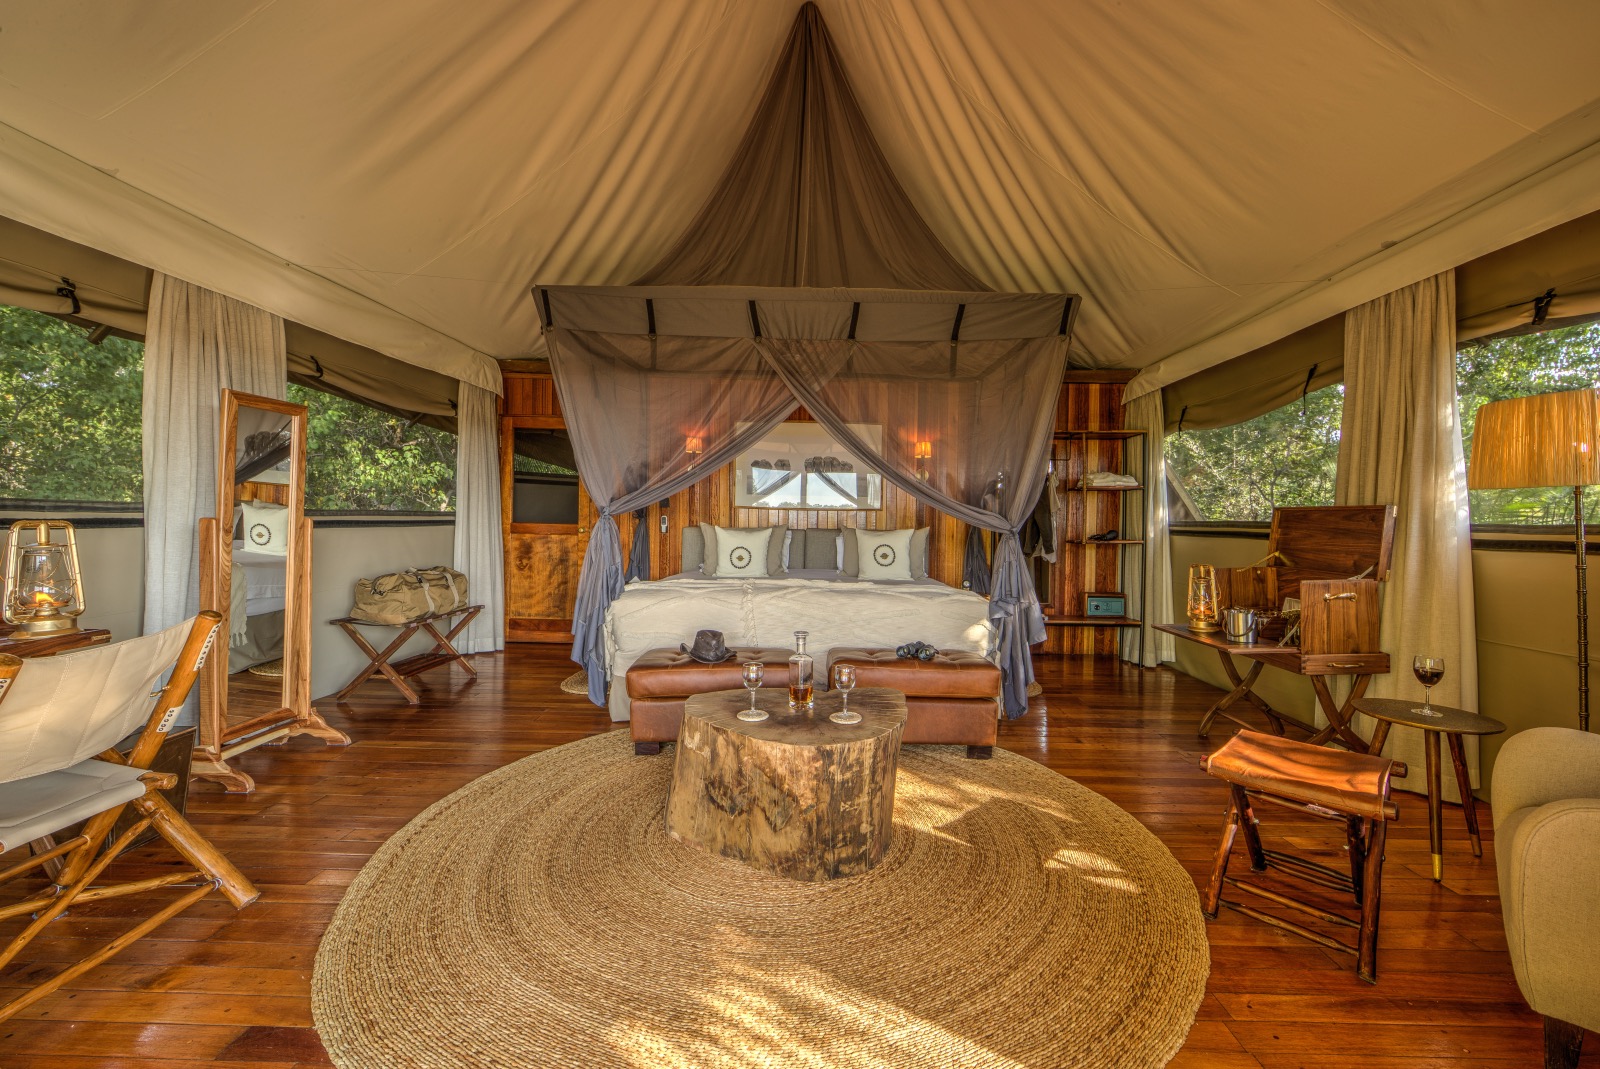 Elegant safari bedroom with canvas ceiling and wooden floors and a four-posted king-size bed in the middle